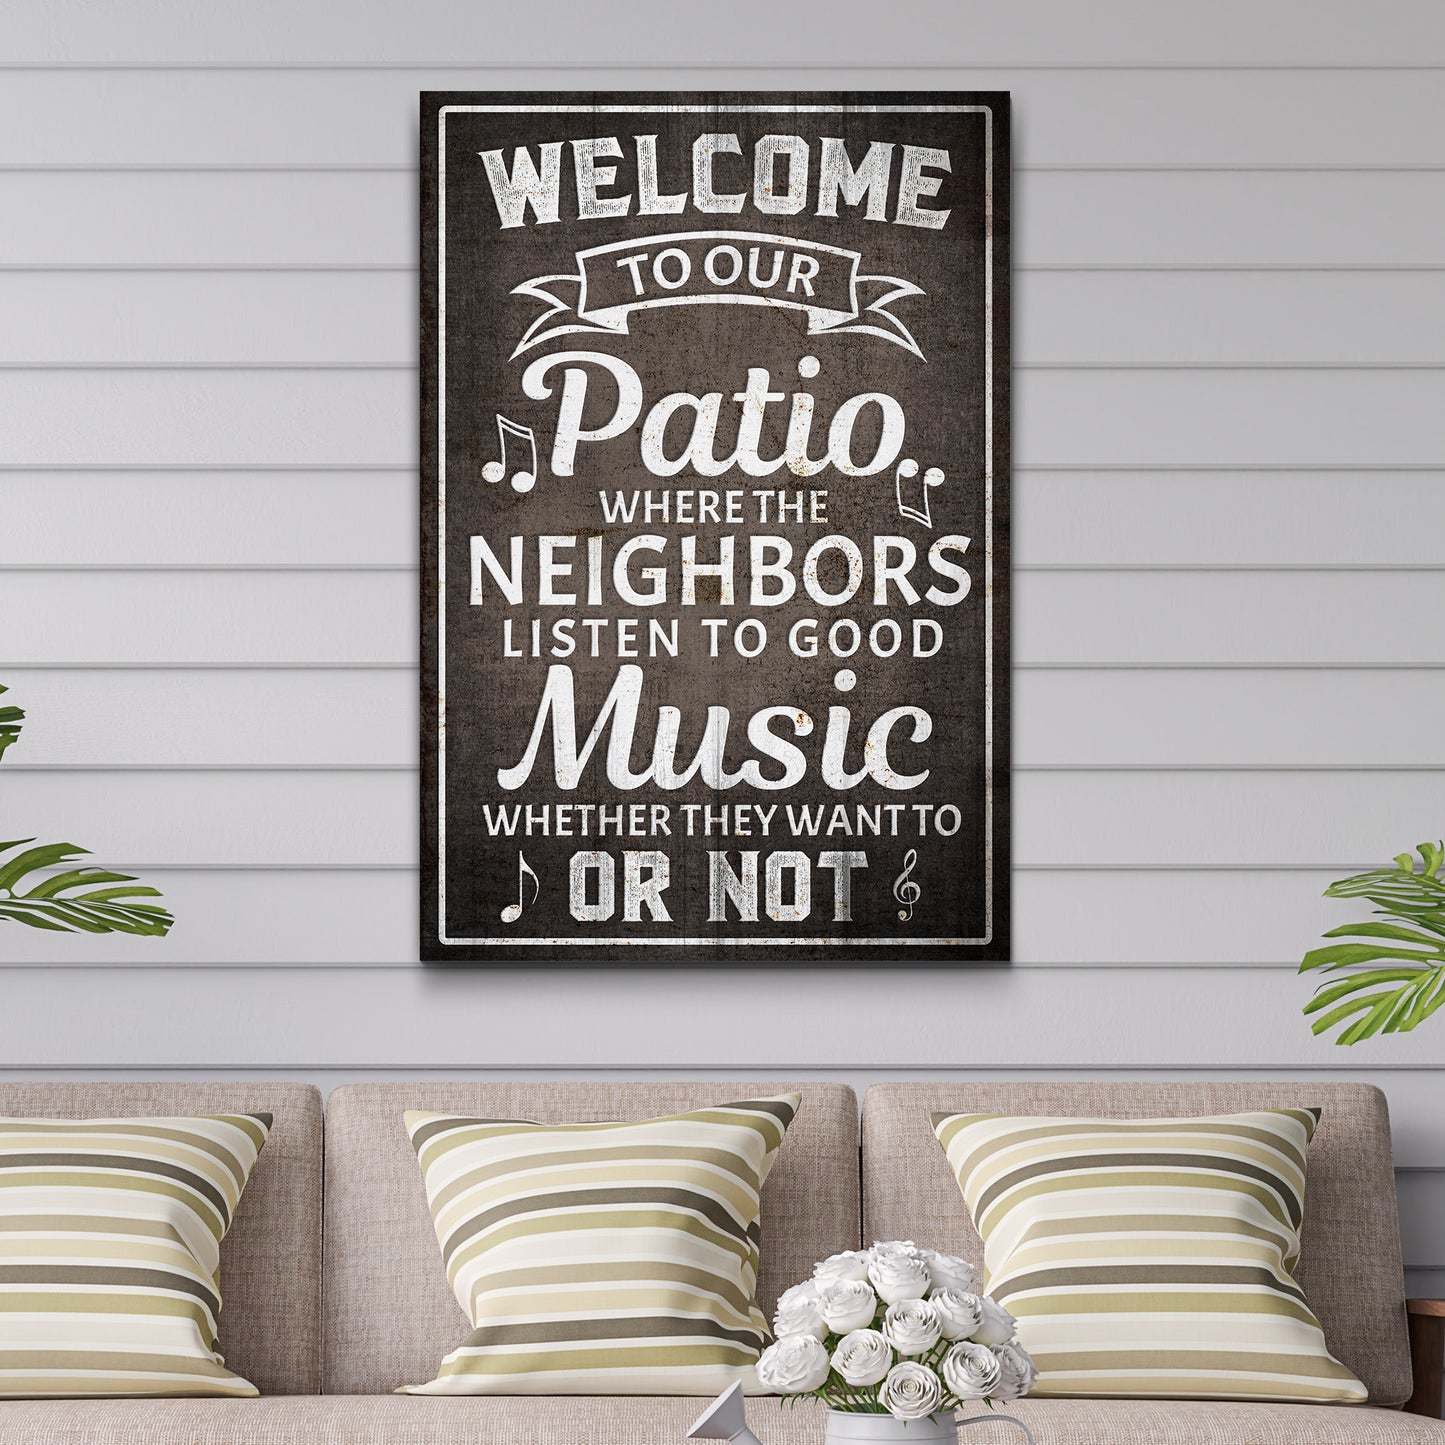 Welcome To Our Patio Sign II - Image by Tailored Canvases